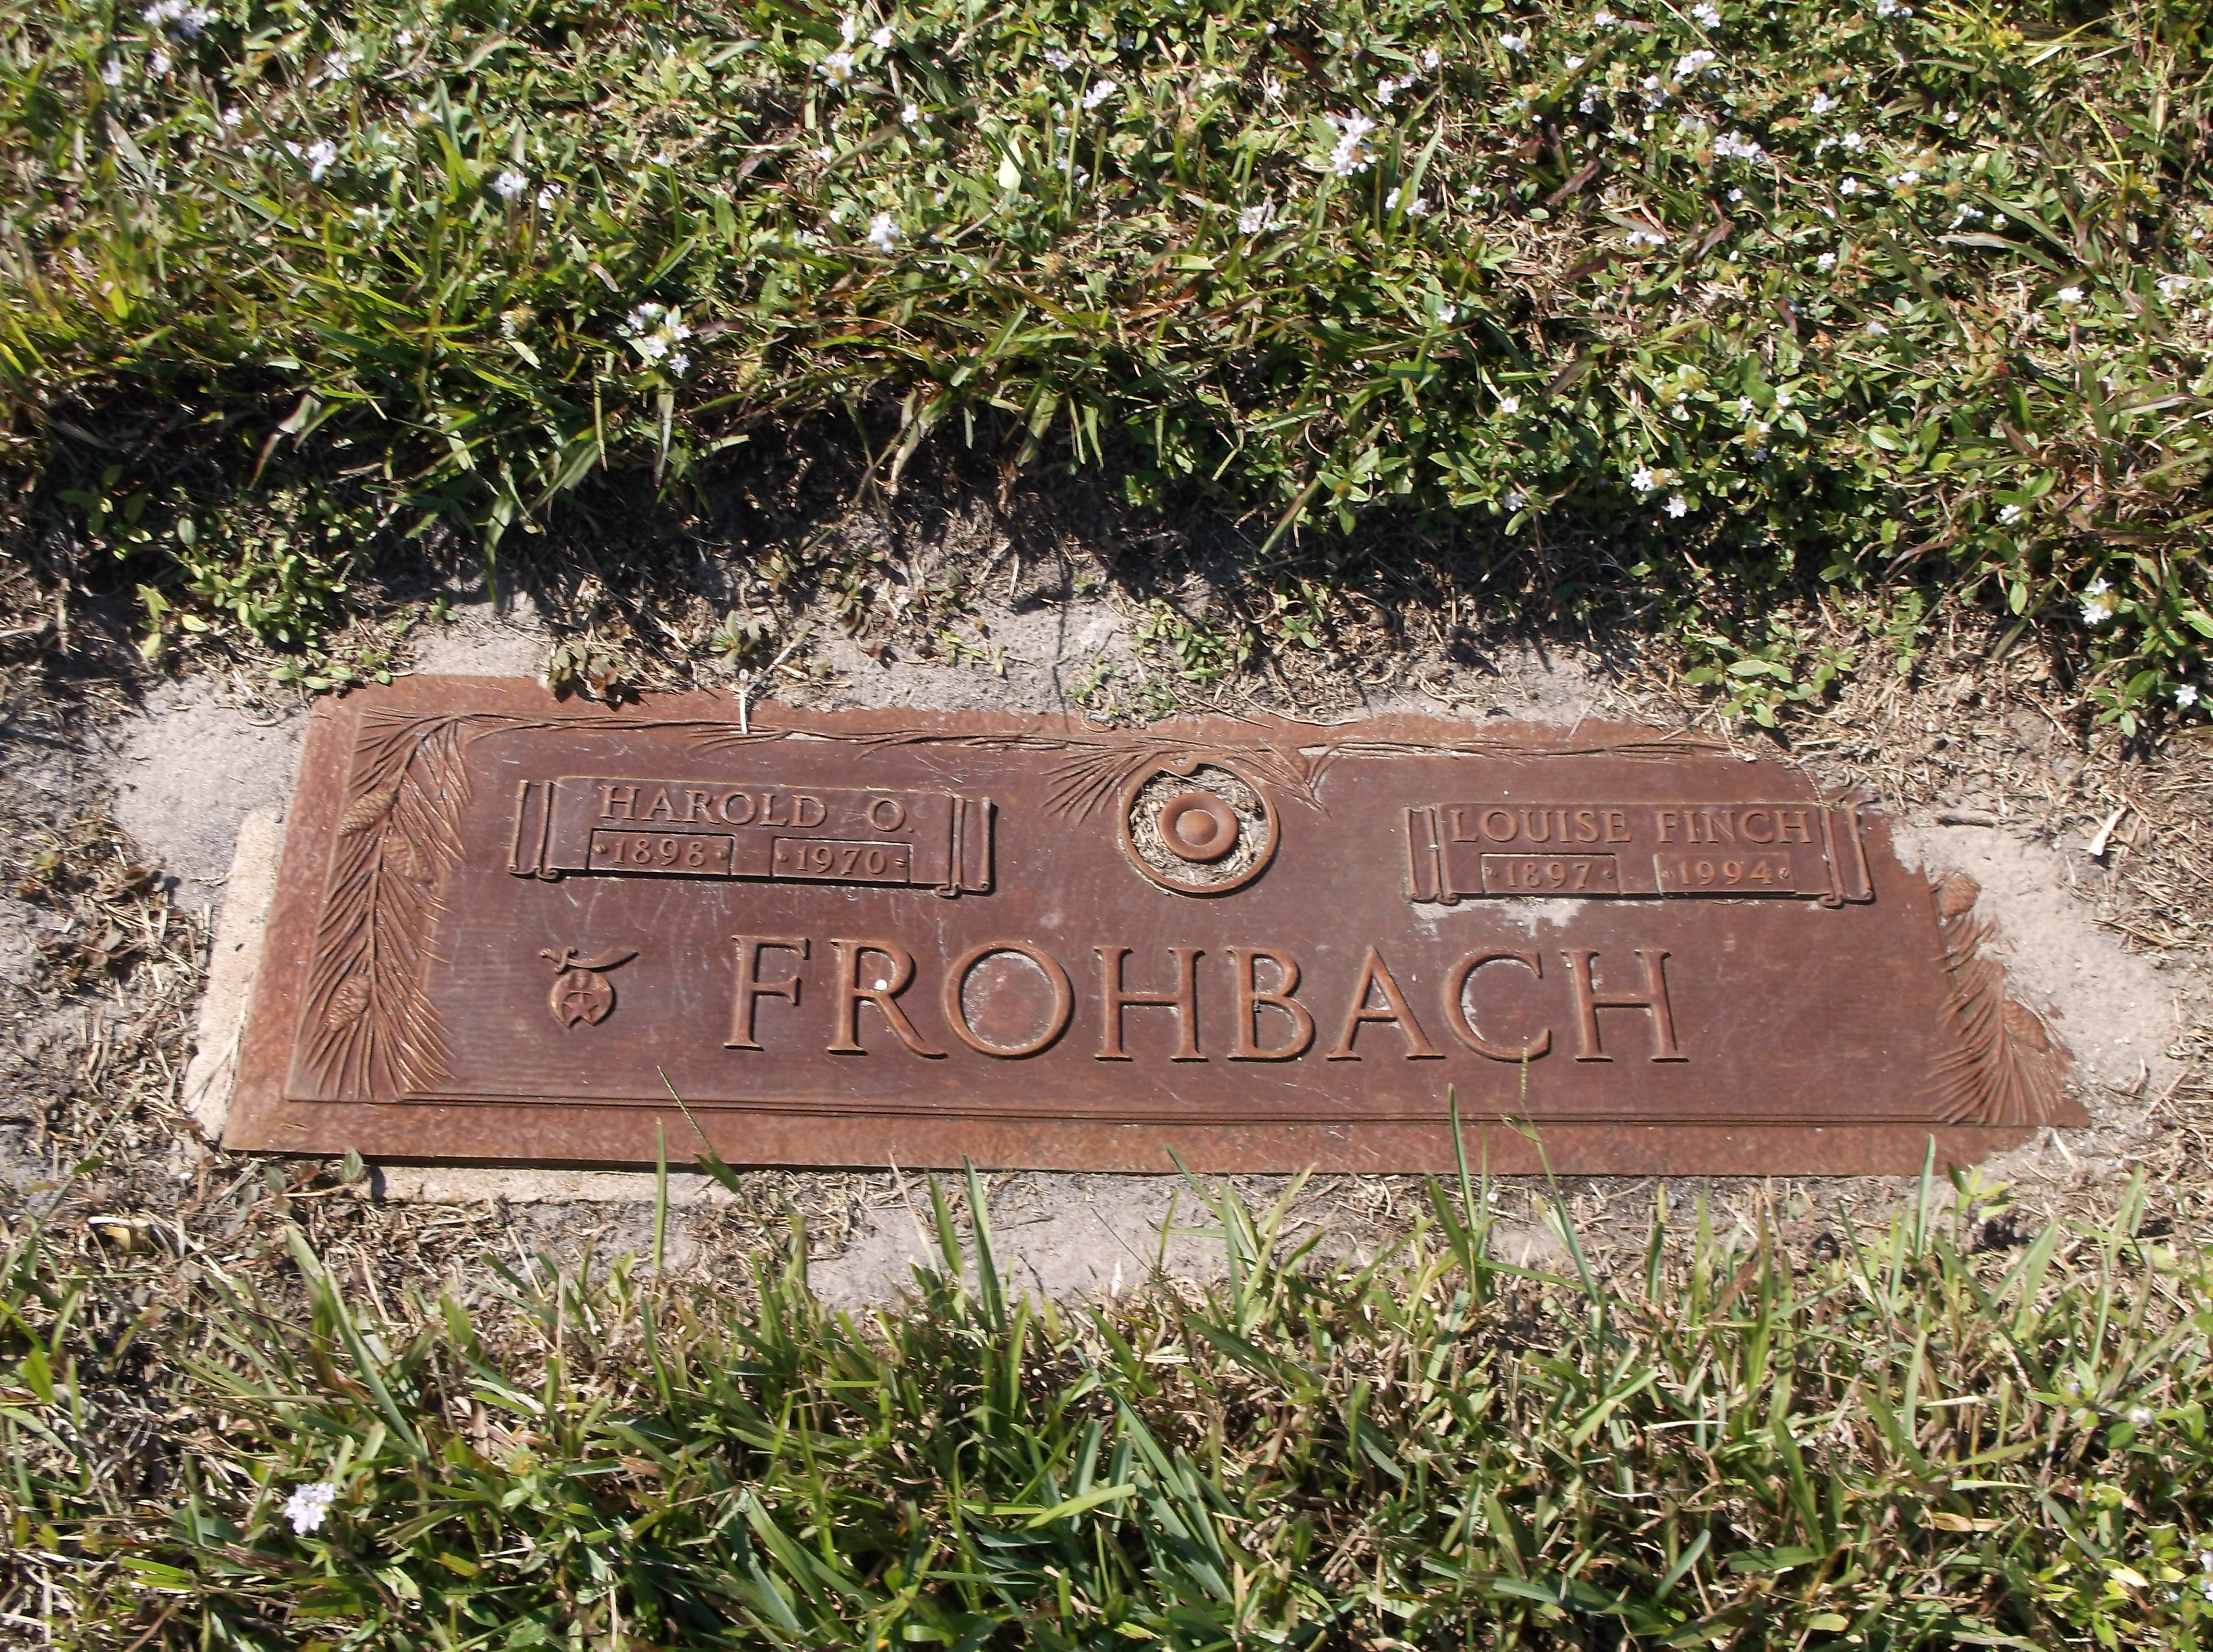 Louise Finch Frohbach